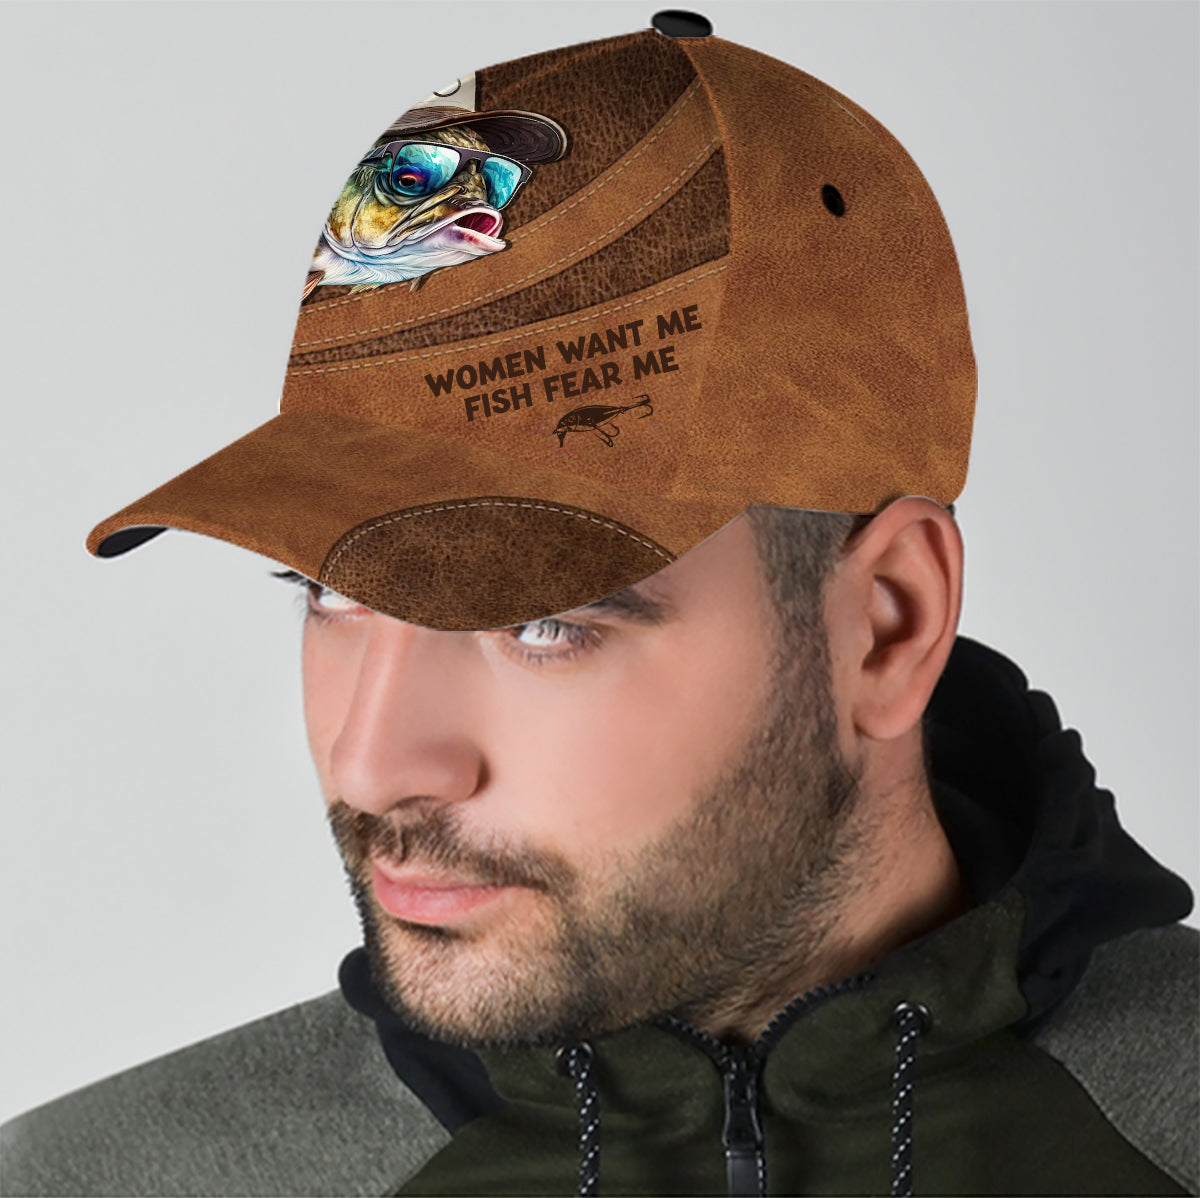 Fish Want Me Men Scare Me Vintage Fishing Hat For Women Funny Fishing Hat Gift Summer Fishing Hat Gift For Fisherman Summer Fishing Hat